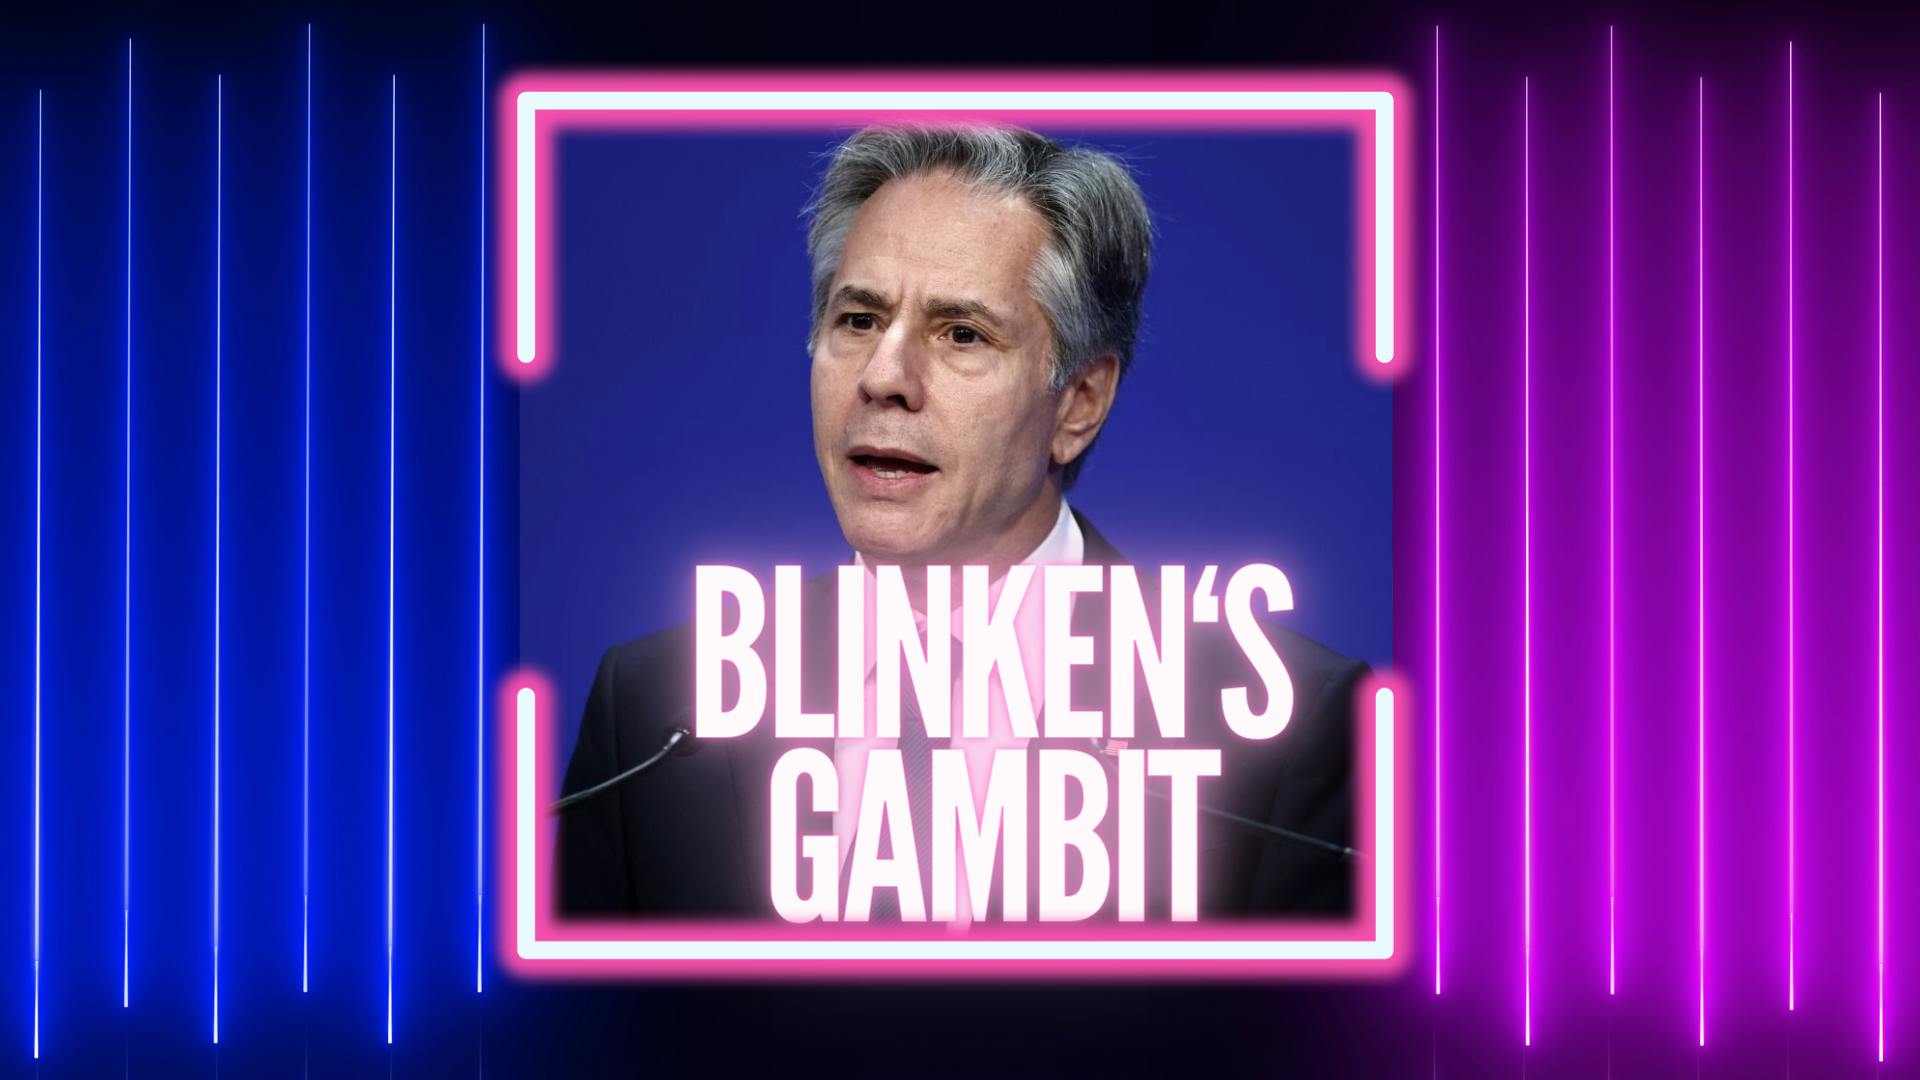 Blinken's Gambit: Can He Turn A Hostage Crisis into Mideast Peace?